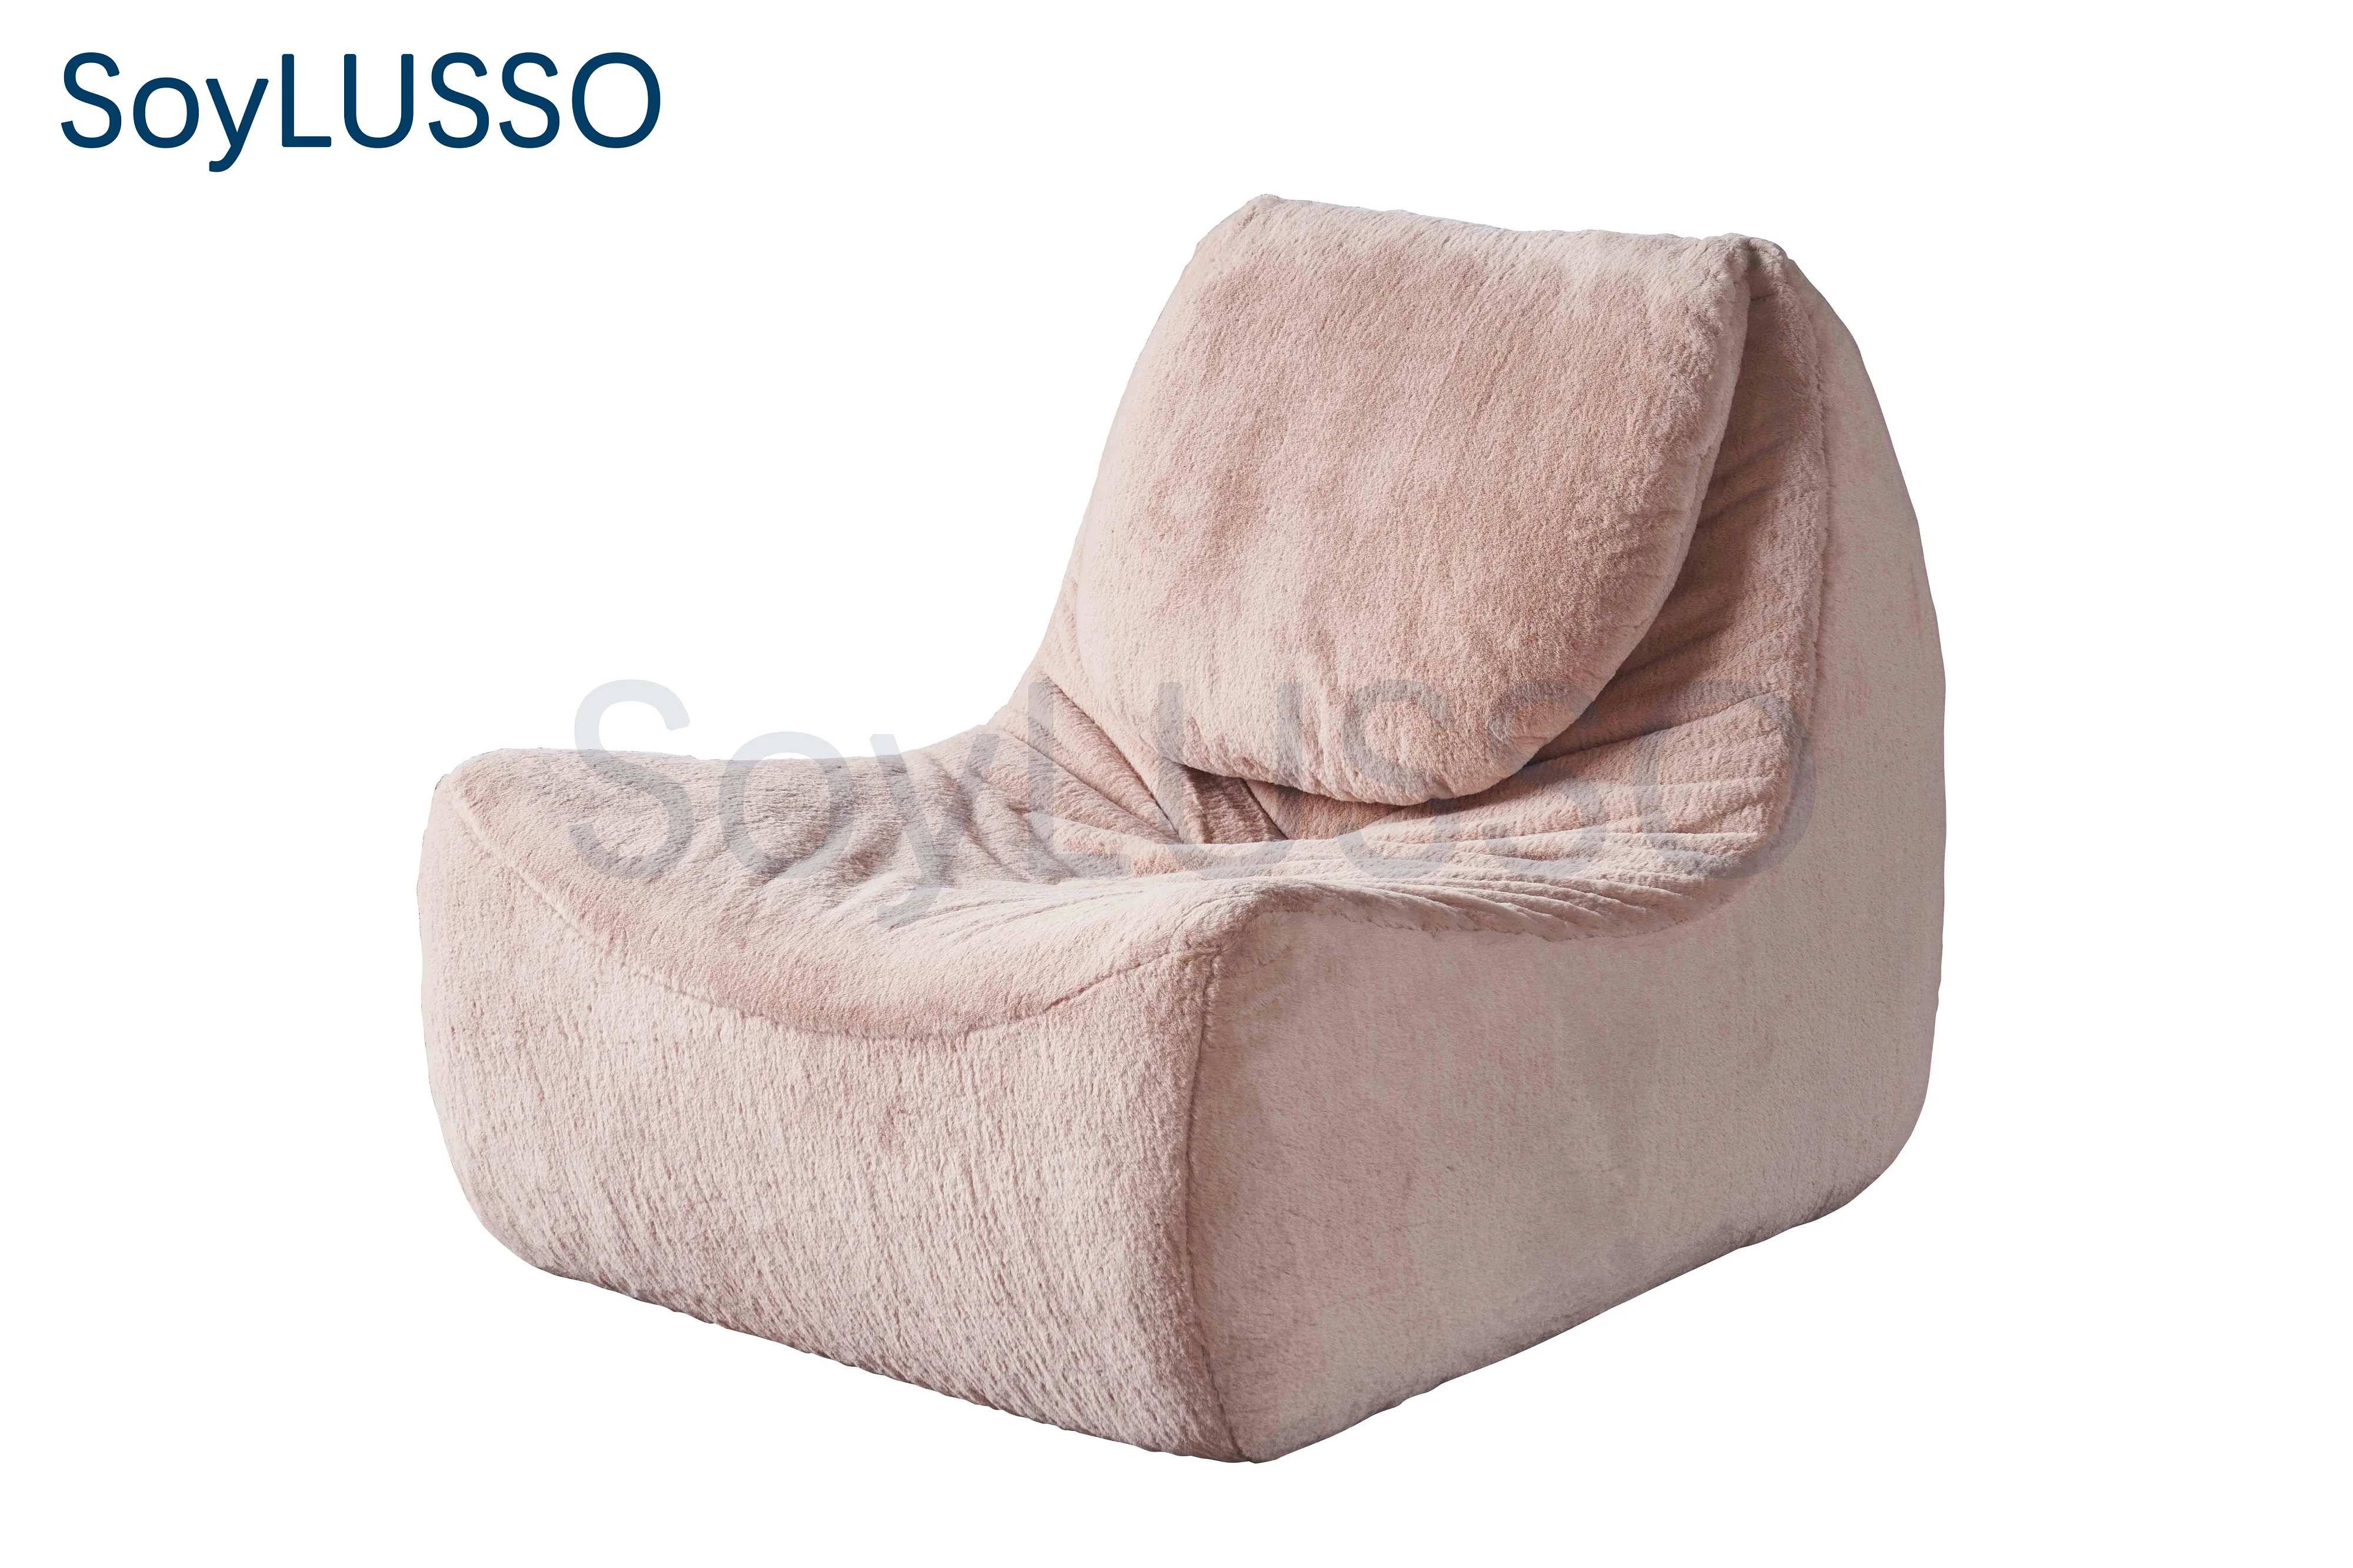 2021 Simple Modern Design Retail Comfortable sofa chairs Living Room Furniture lounge chair for Apartment